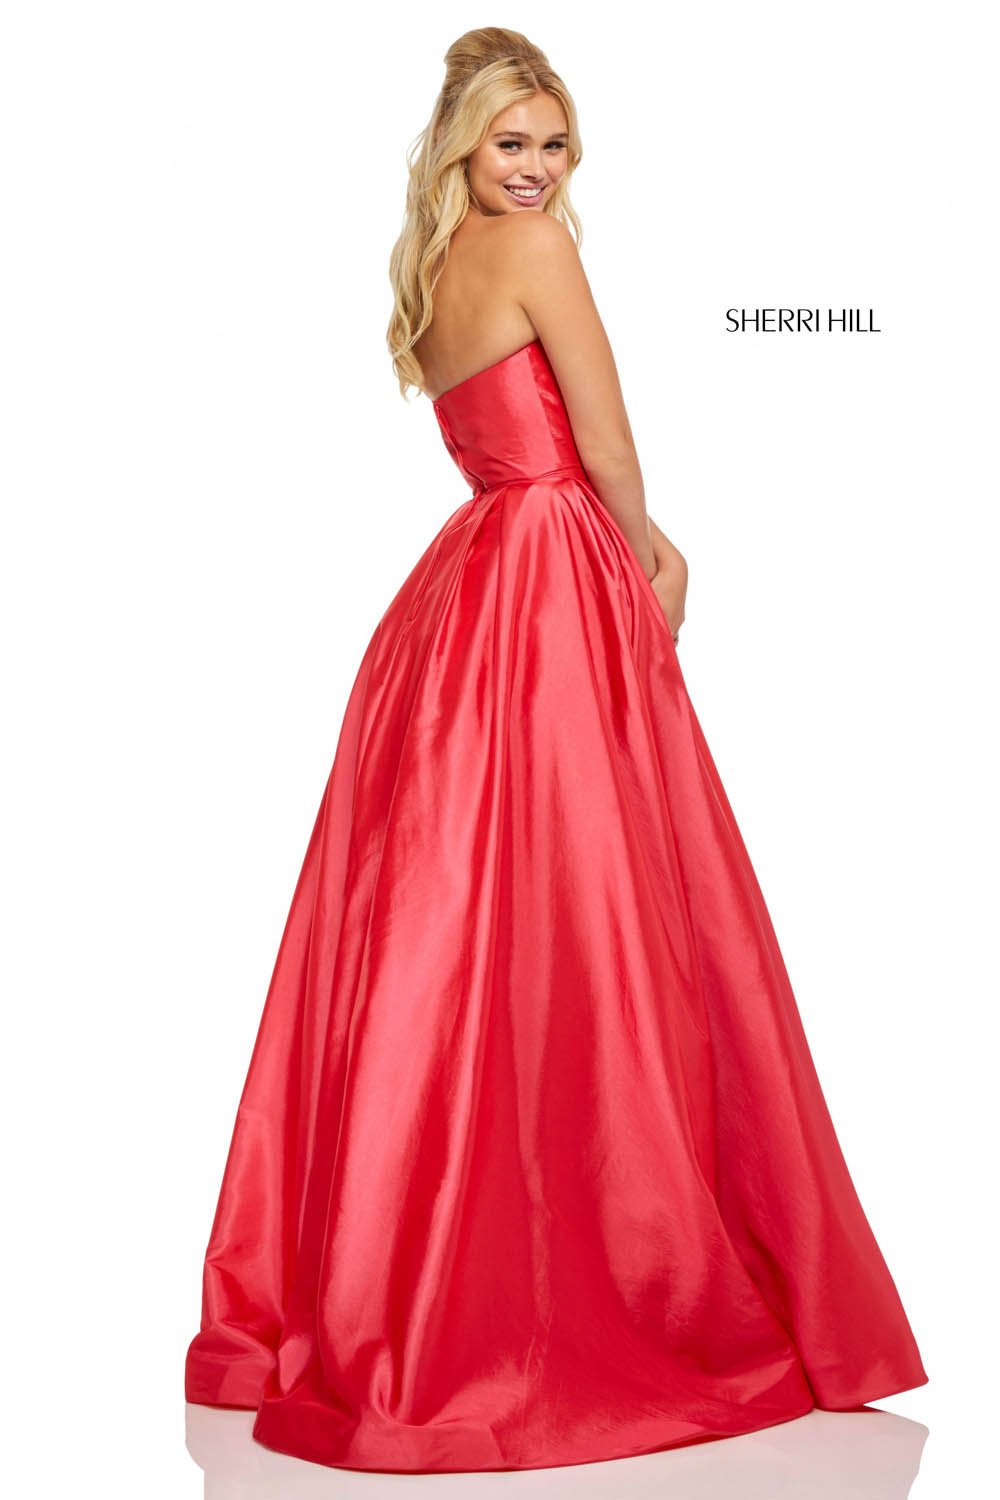 Sherri Hill 52603 dress images in these colors: Red, Navy, Lilac, Light Blue, Dark Coral, Emerald, Light Yellow, Bright Pink.